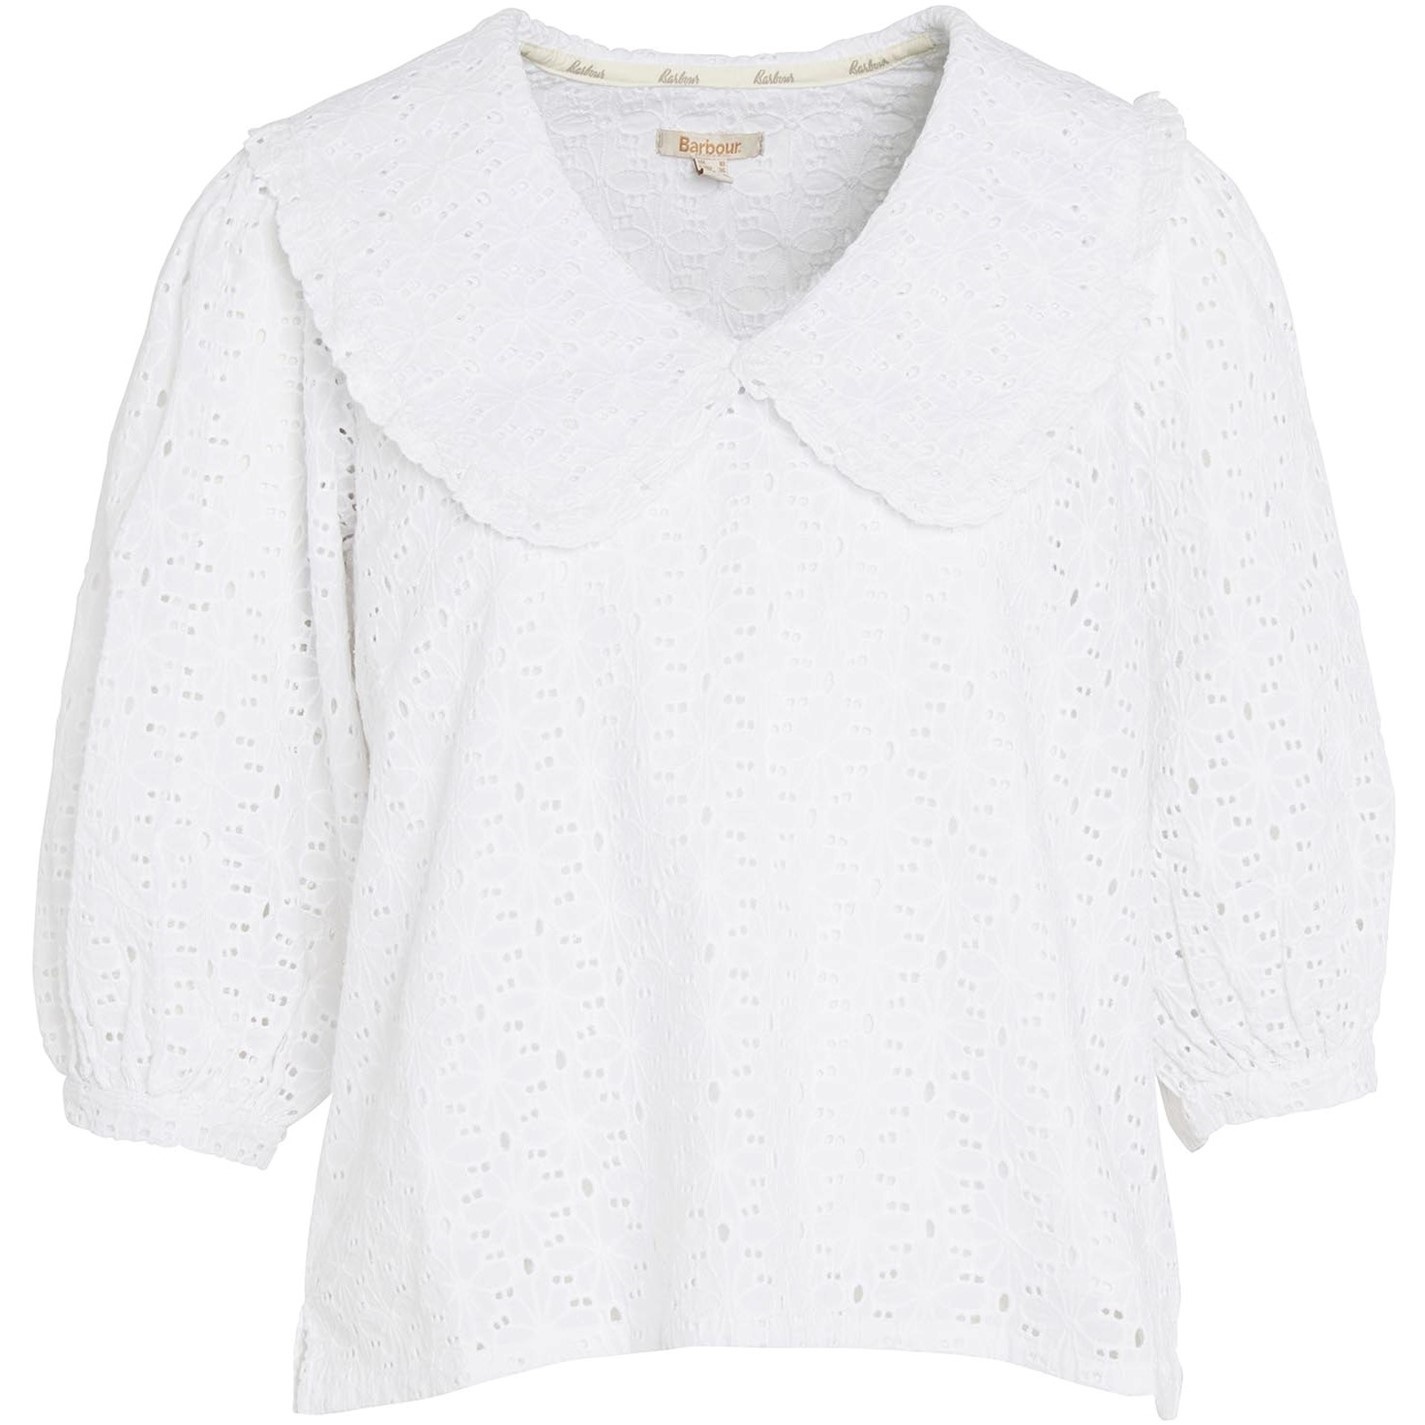 KELLEY BRODERIE ANGLAISE BLOUSE - 1